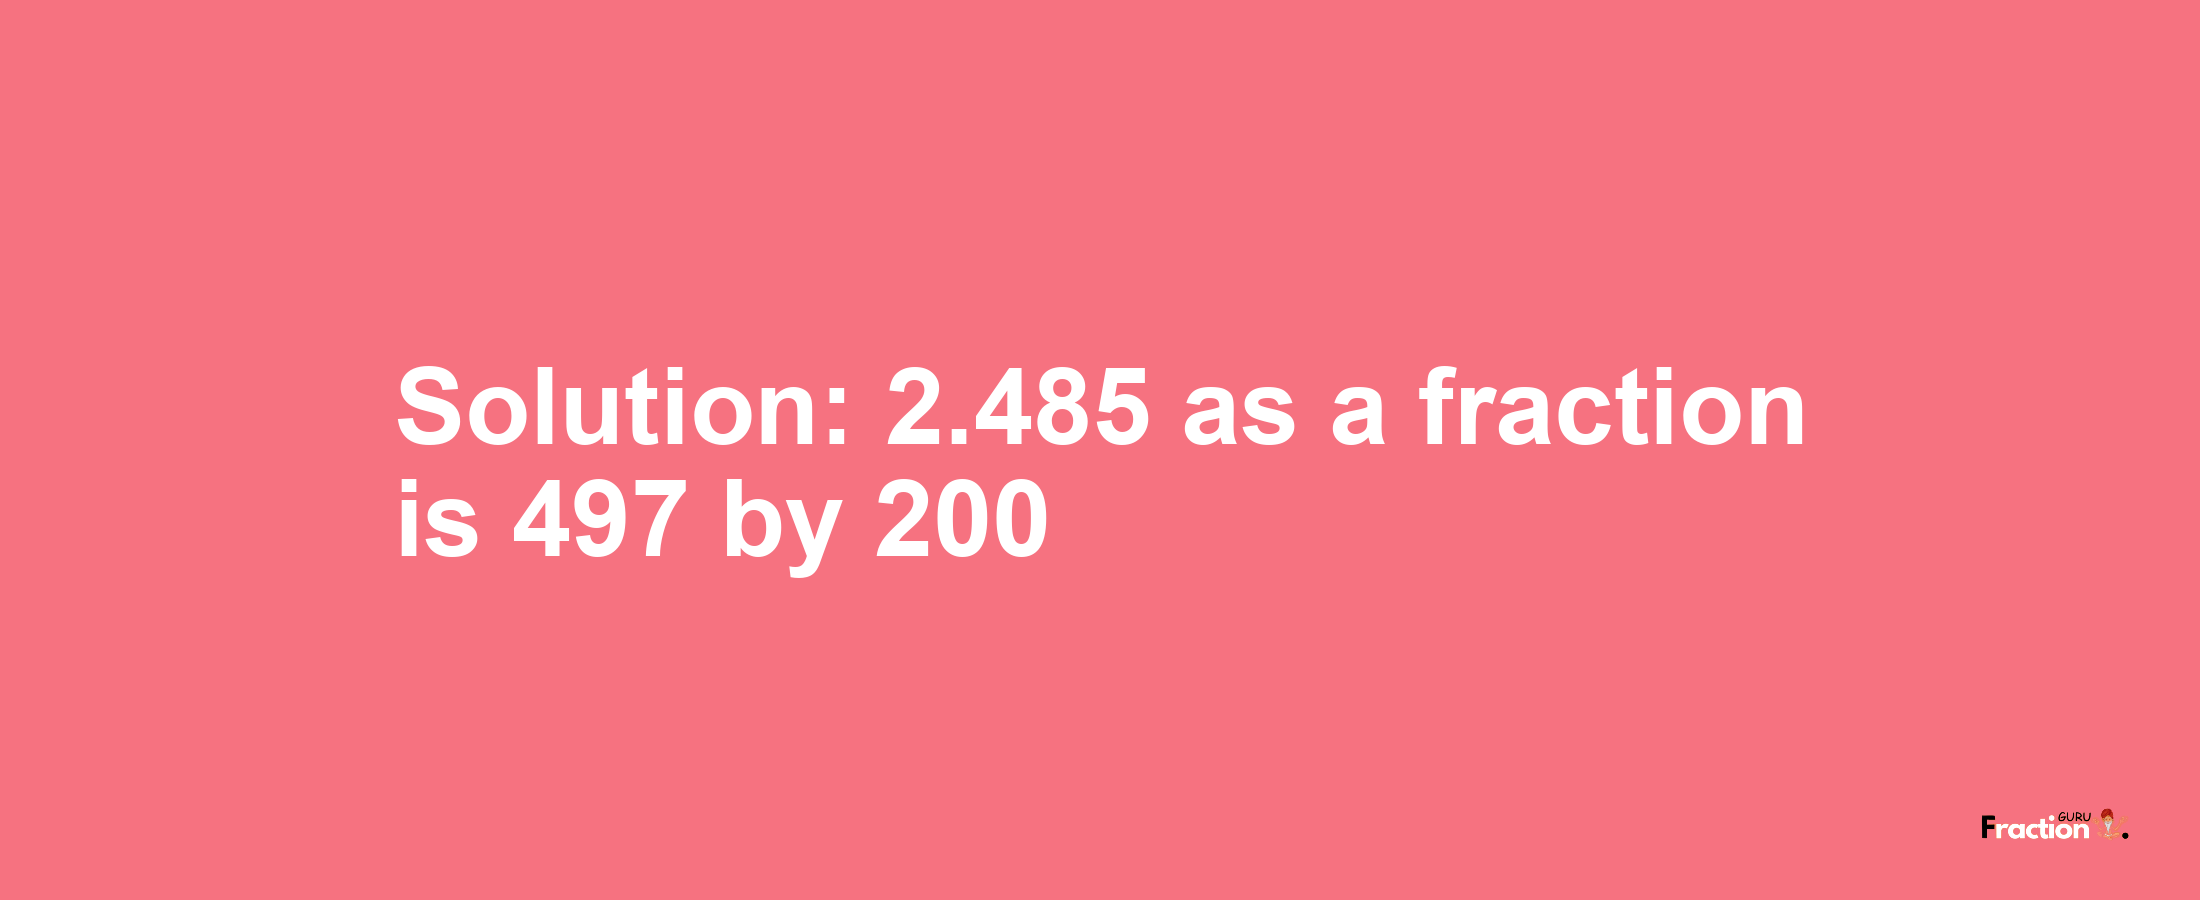 Solution:2.485 as a fraction is 497/200